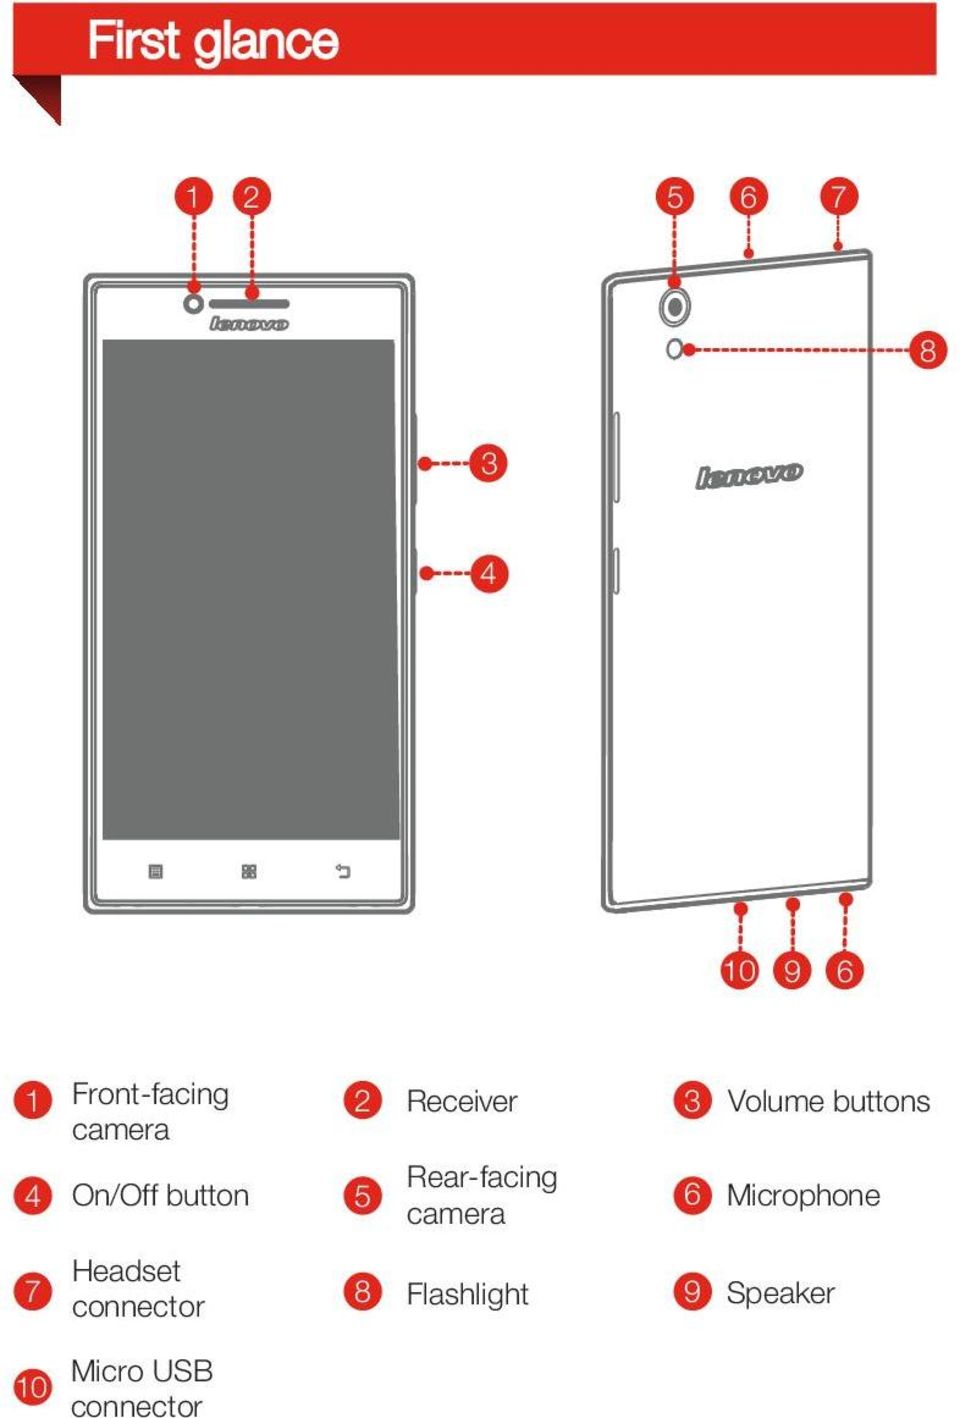 Rear-facing camera 3 6 Volume buttons Microphone 7